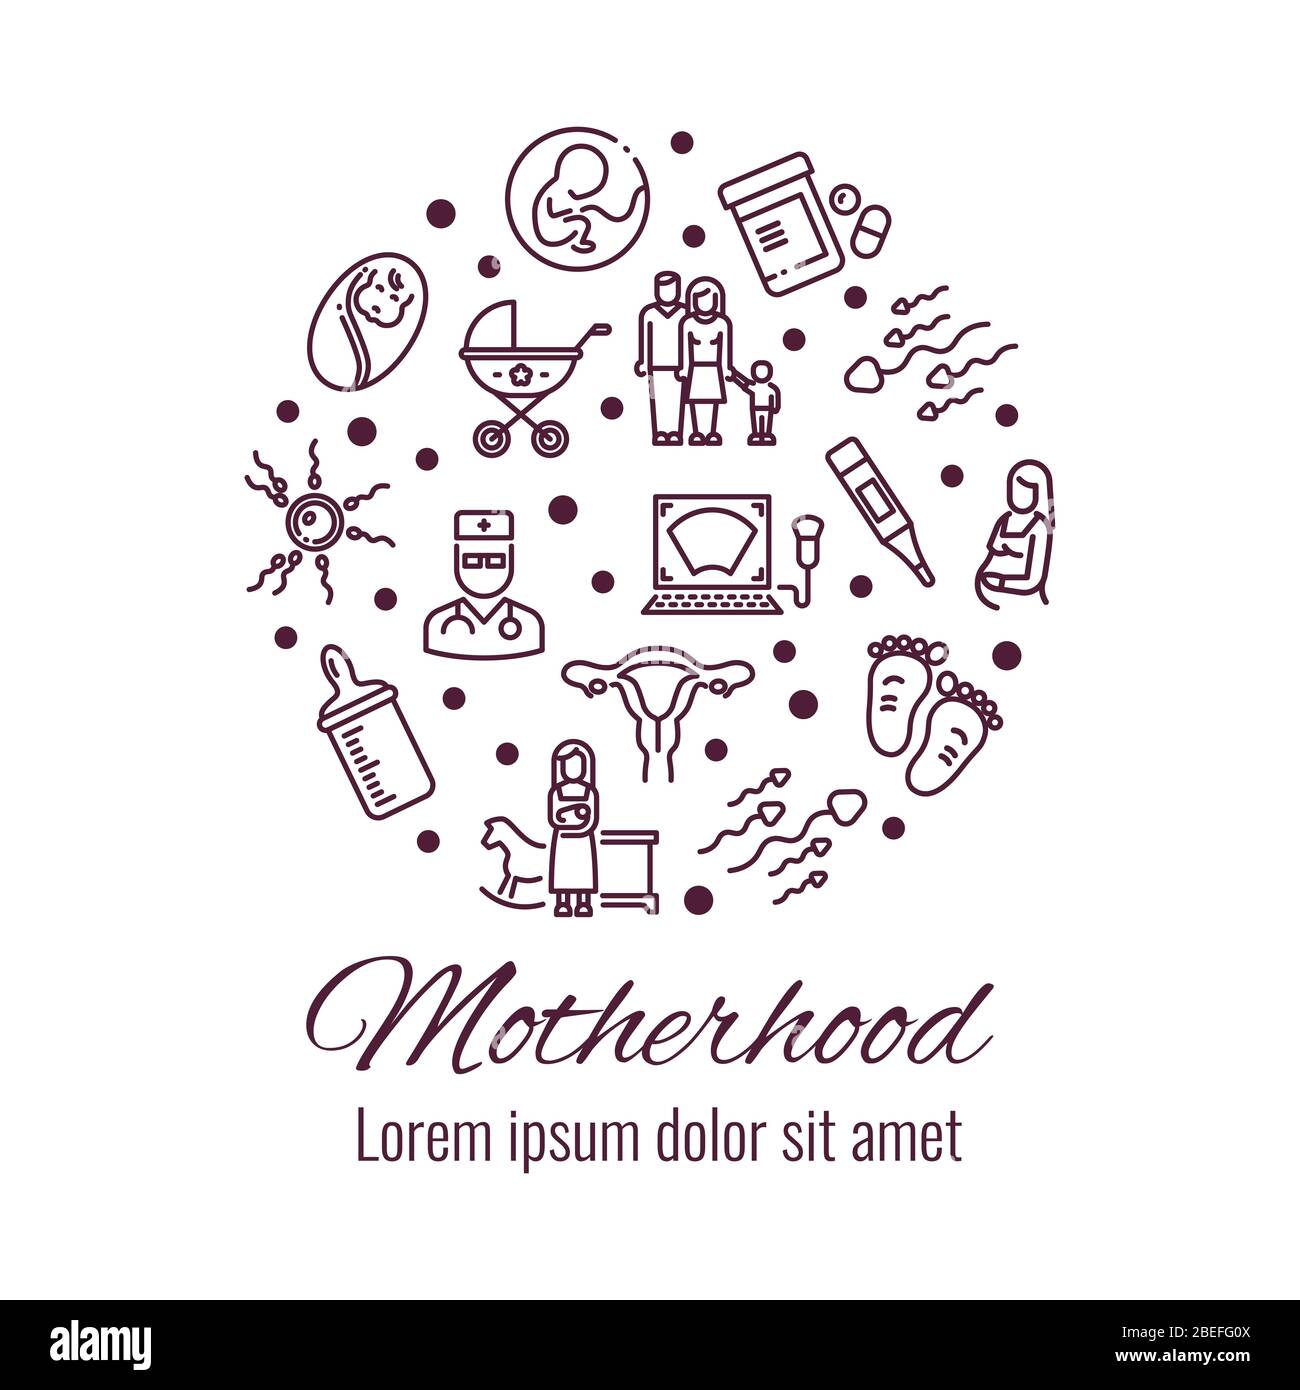 Motherhood thin line icons round shape form concept. Vector illustration Stock Vector